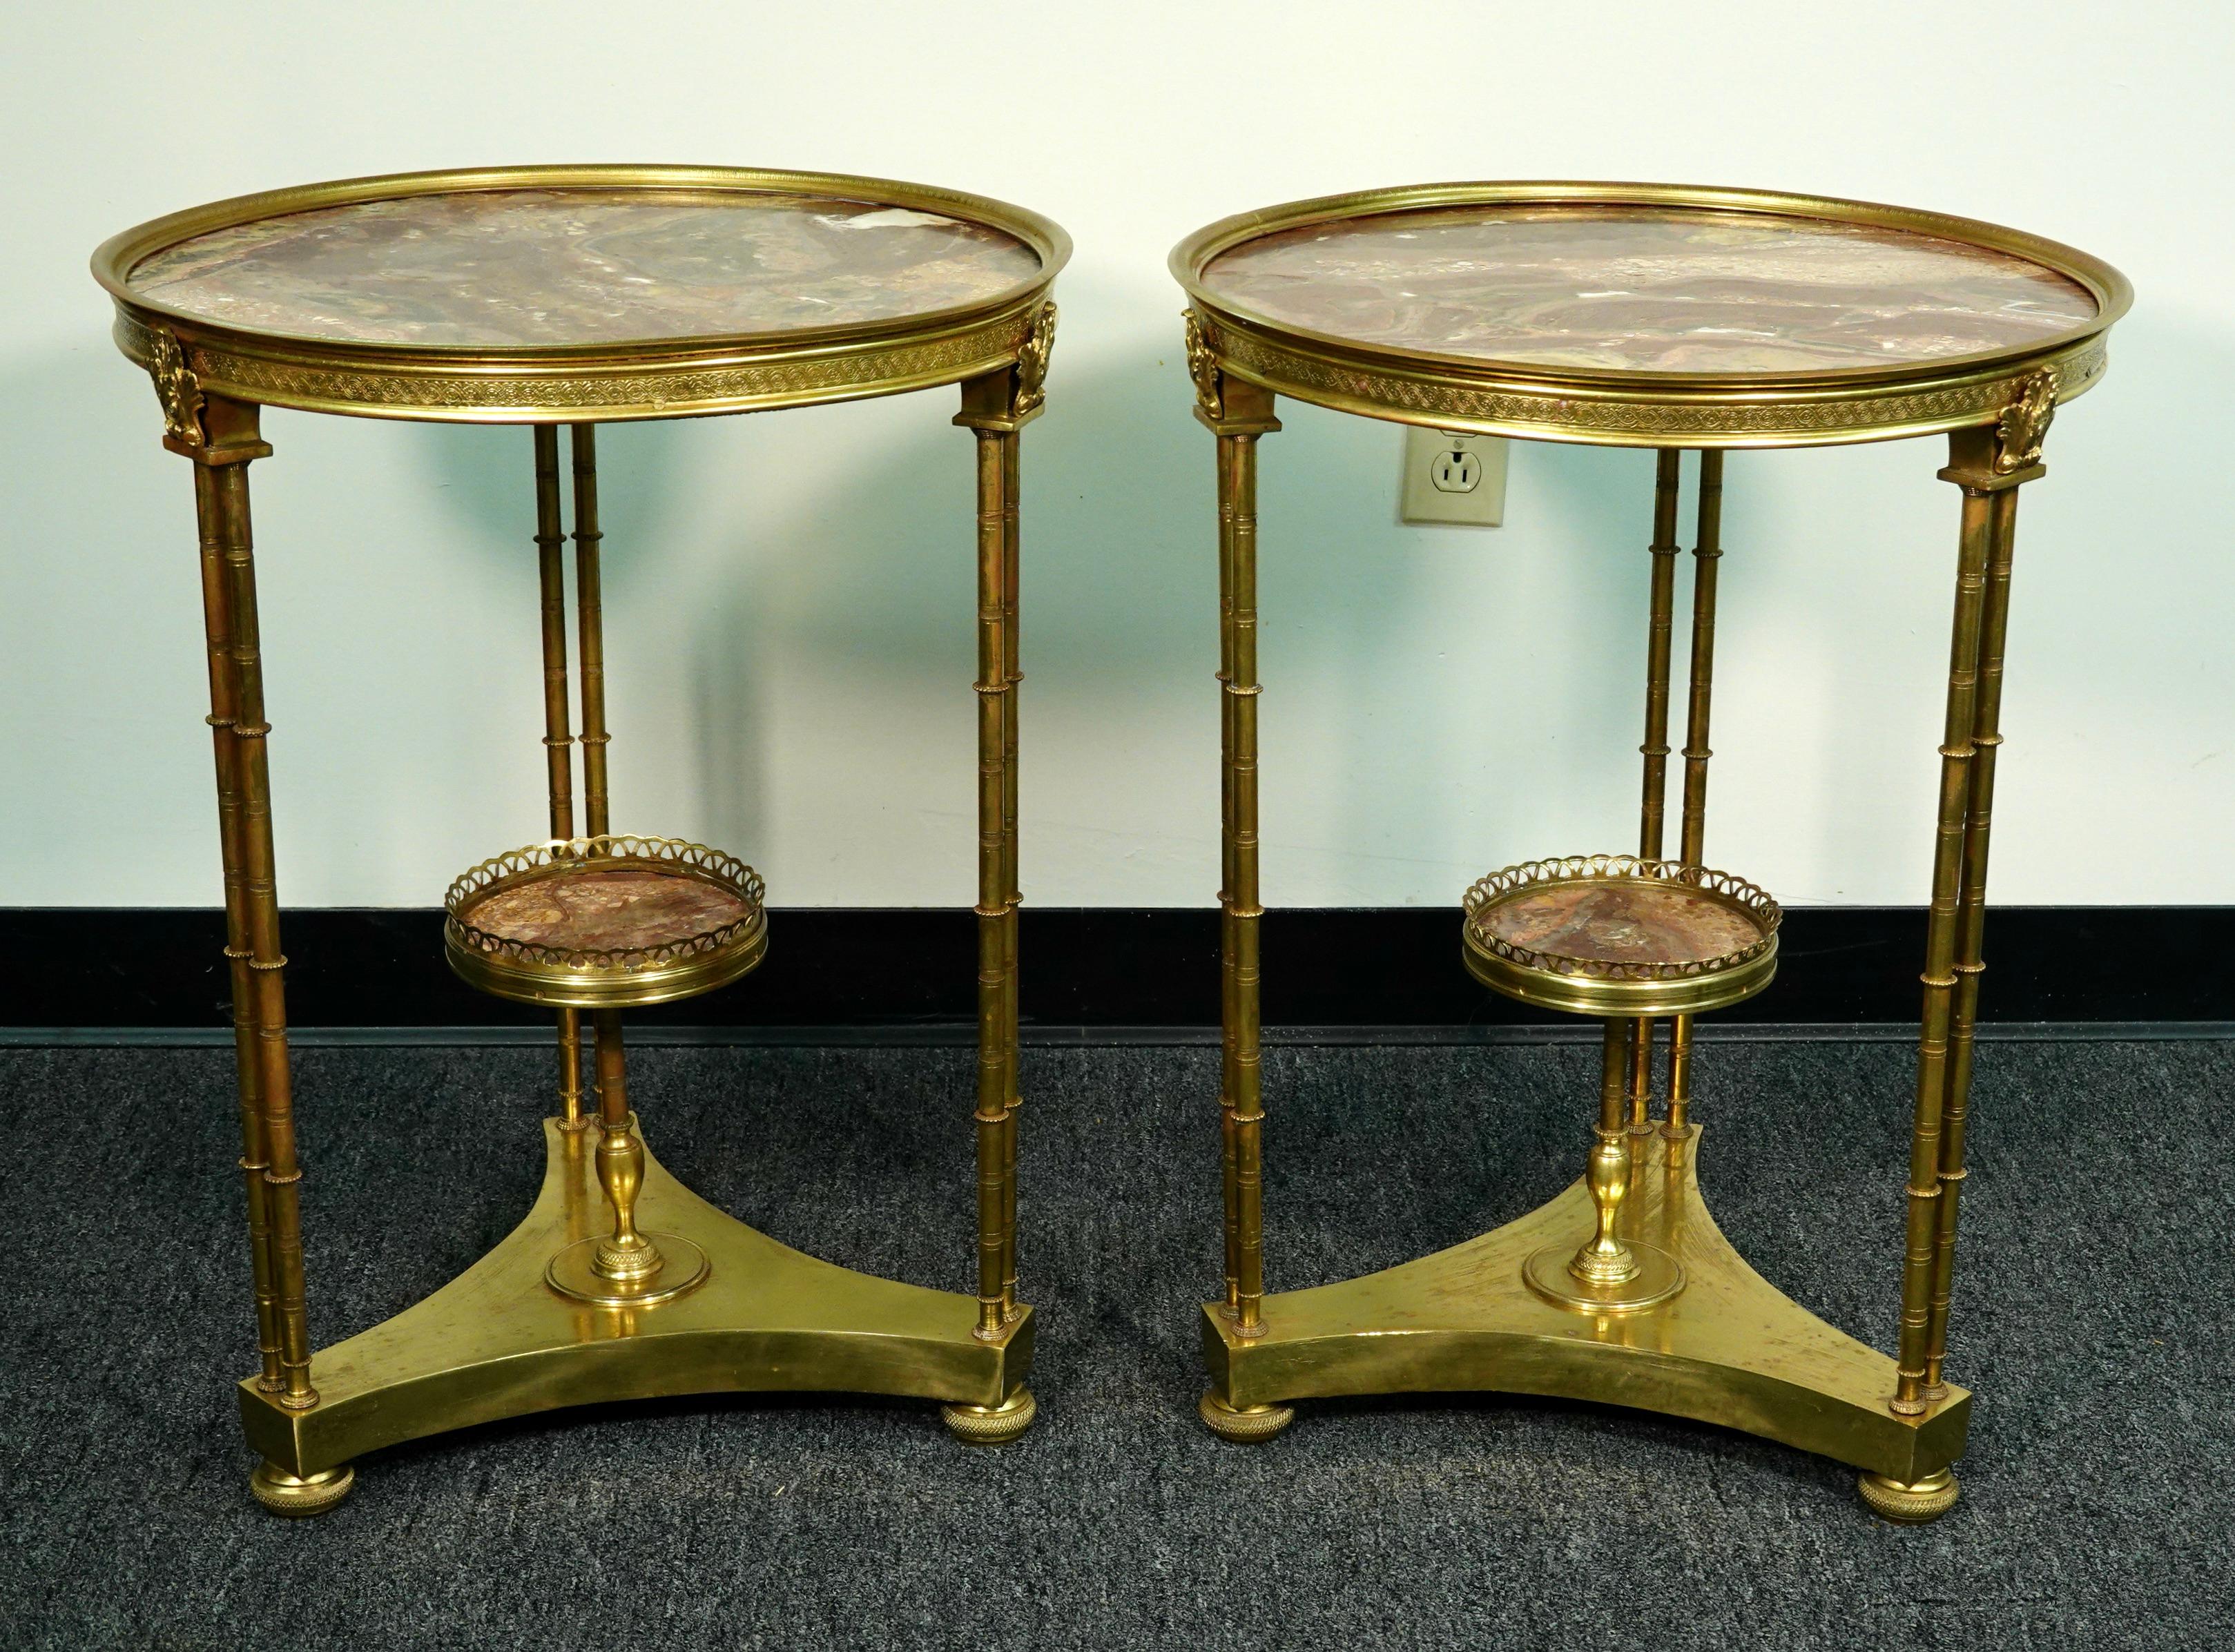 Cast Pair of Louis XVI Style Gilt-Bronze Gueridons with Breche d'Alep Marble Tops For Sale